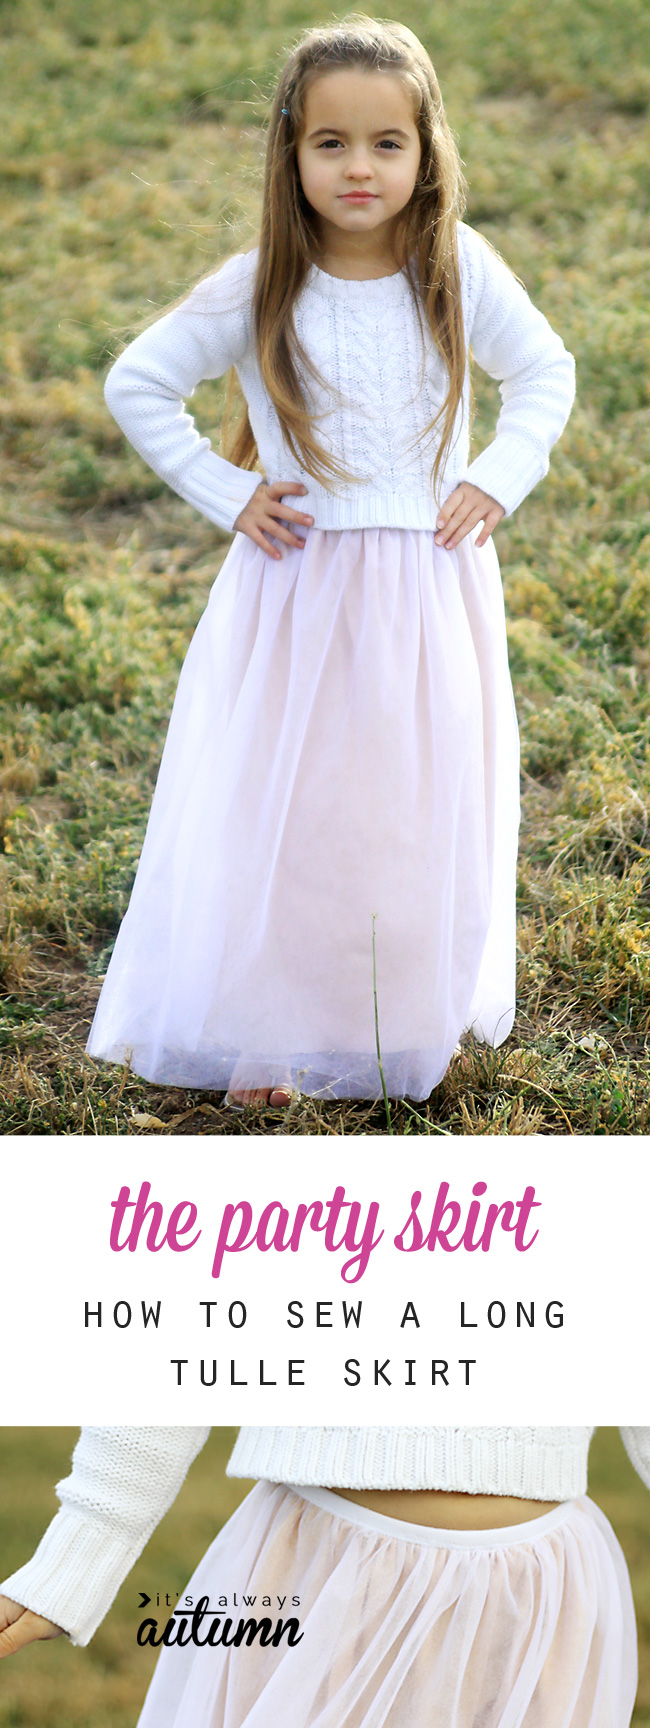 How to Sew a Simple Tulle Skirt with Elastic Band- DIY Tulle Skirt